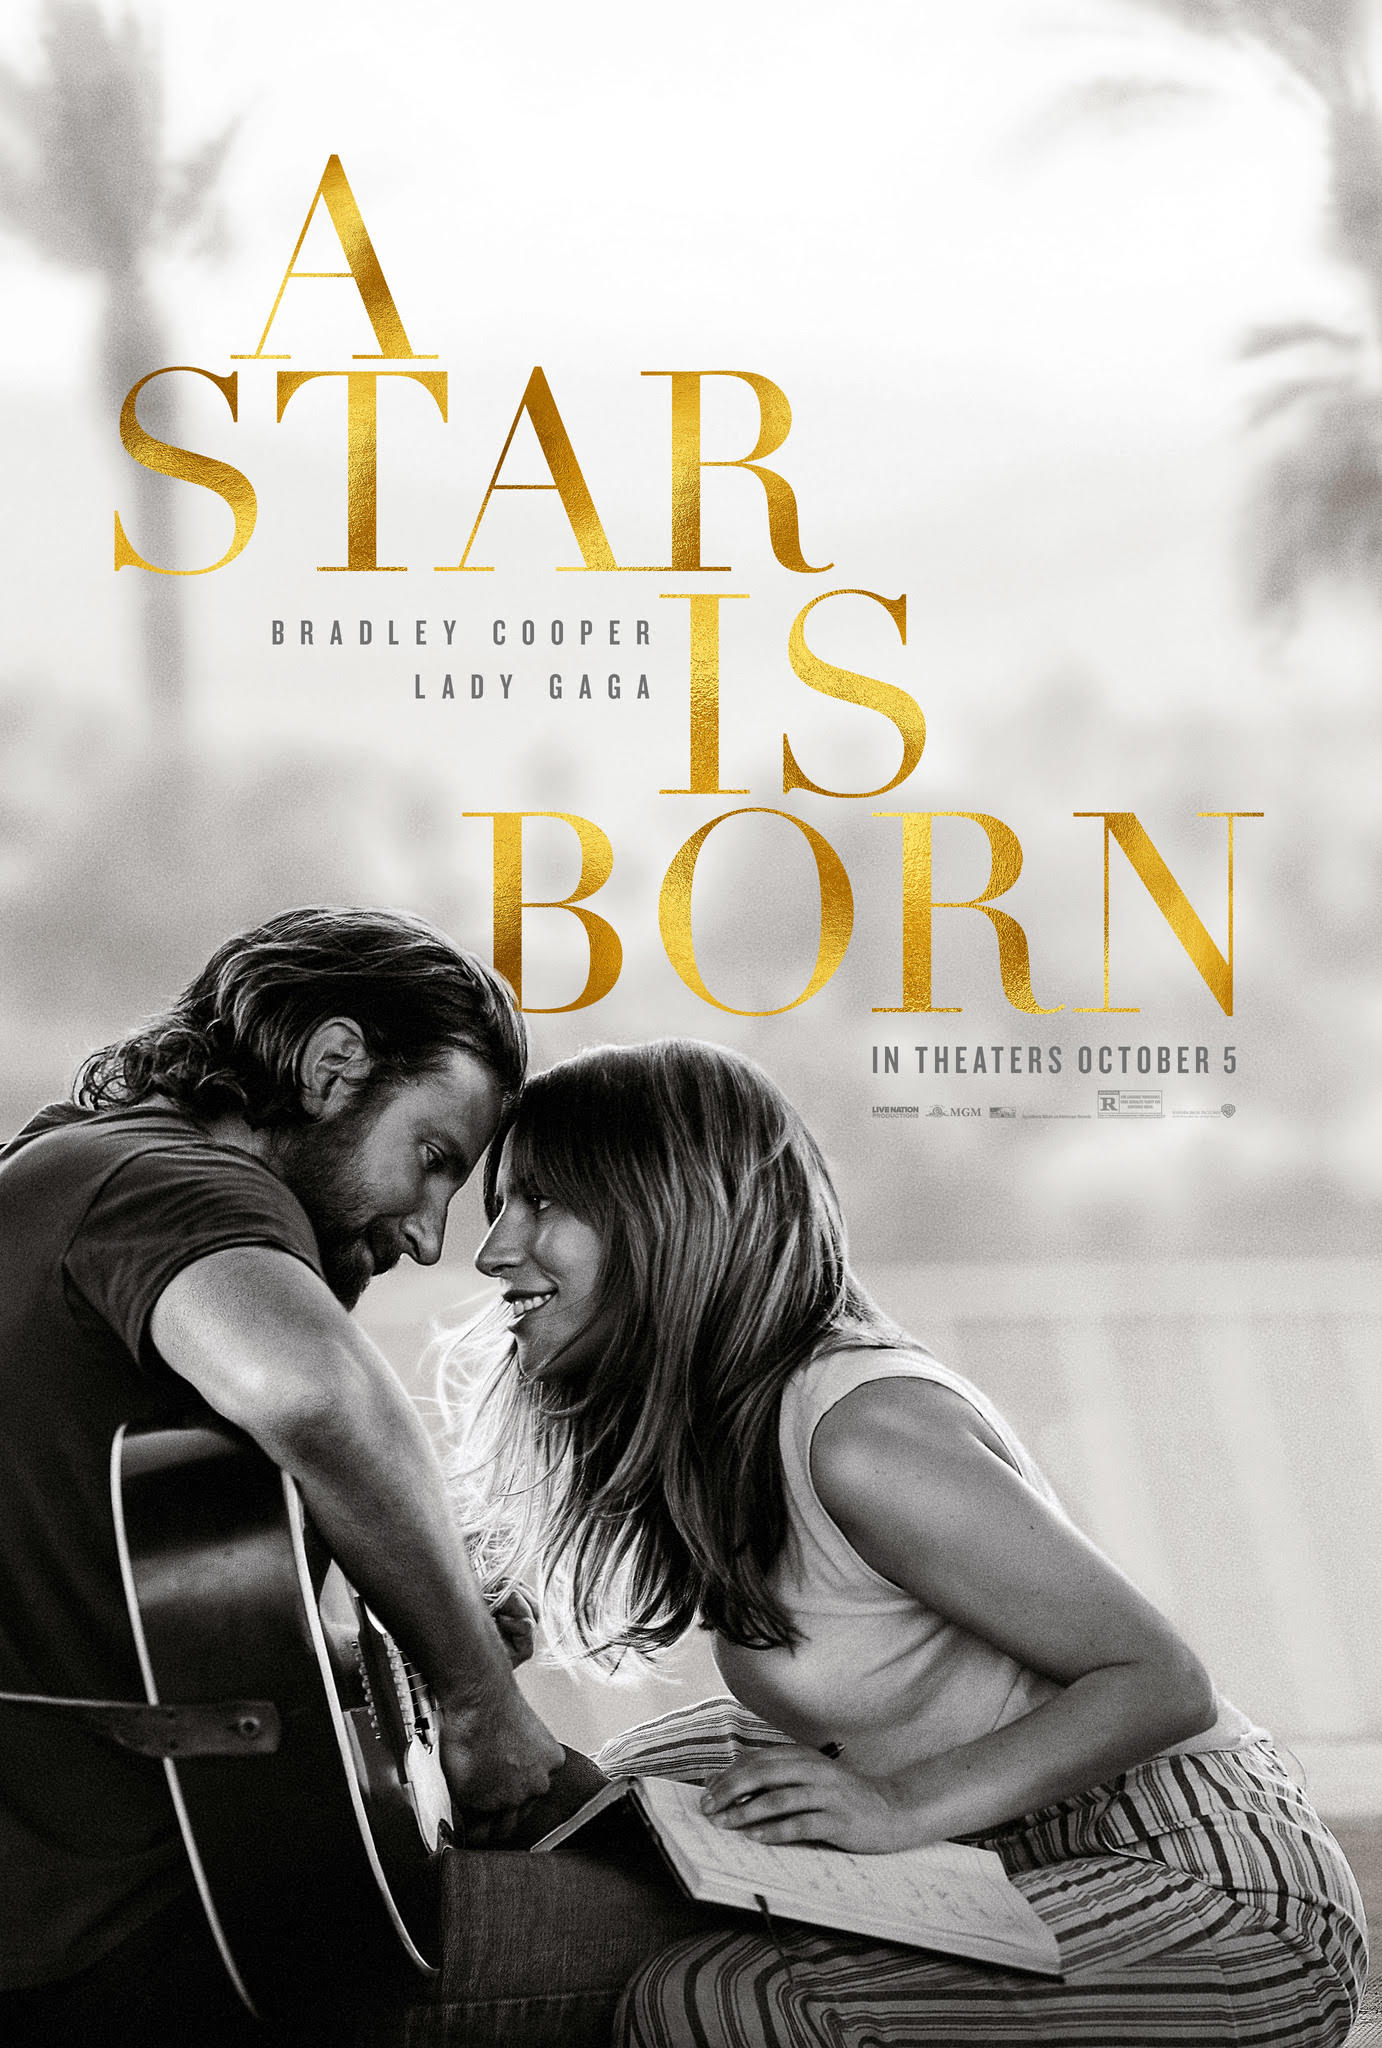 Album for ‘A Star is Born’ is diverse, touching